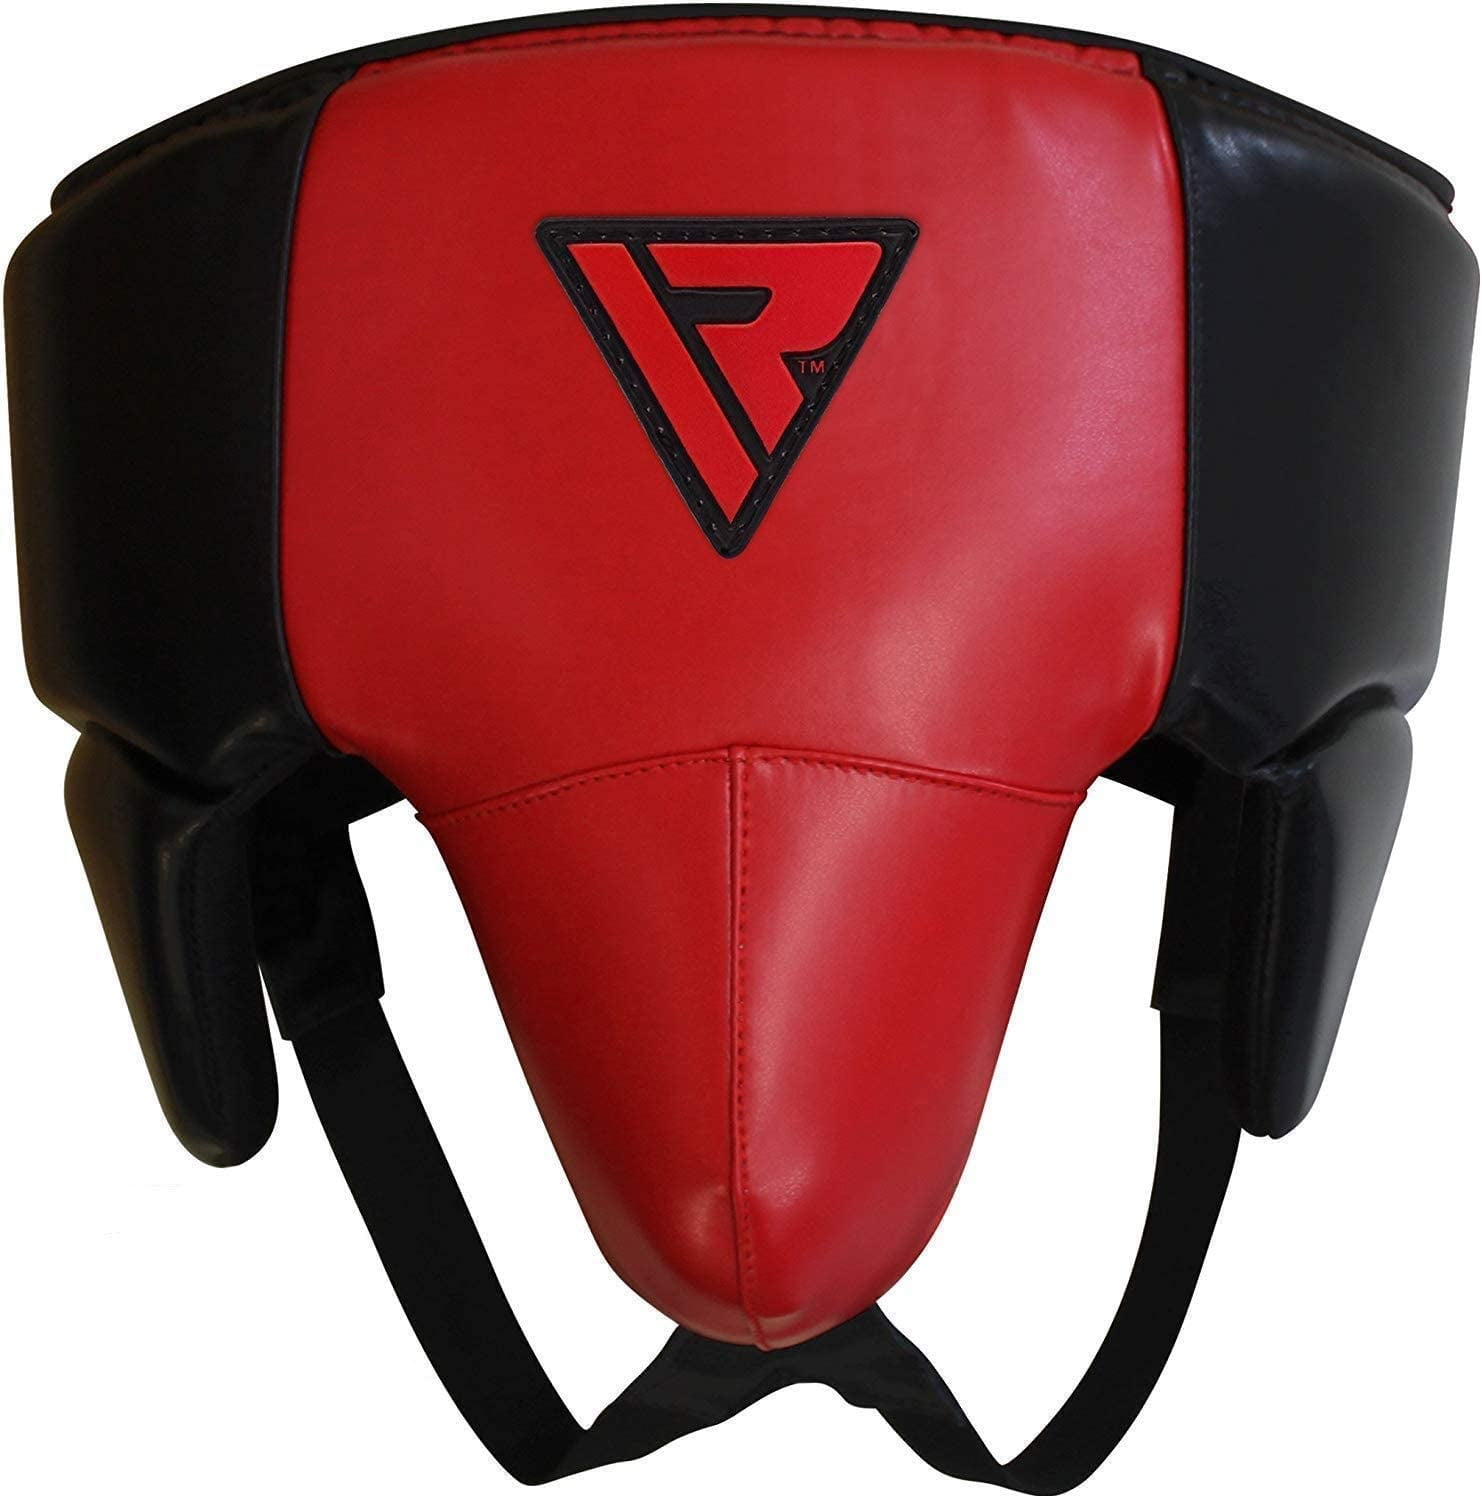 Pro Impact Boxing MMA Training Muay Thai Groin Abdominal Protector Perfect for Gym & Workout Use Comfortable Ultimate Protection for Contact Sports 